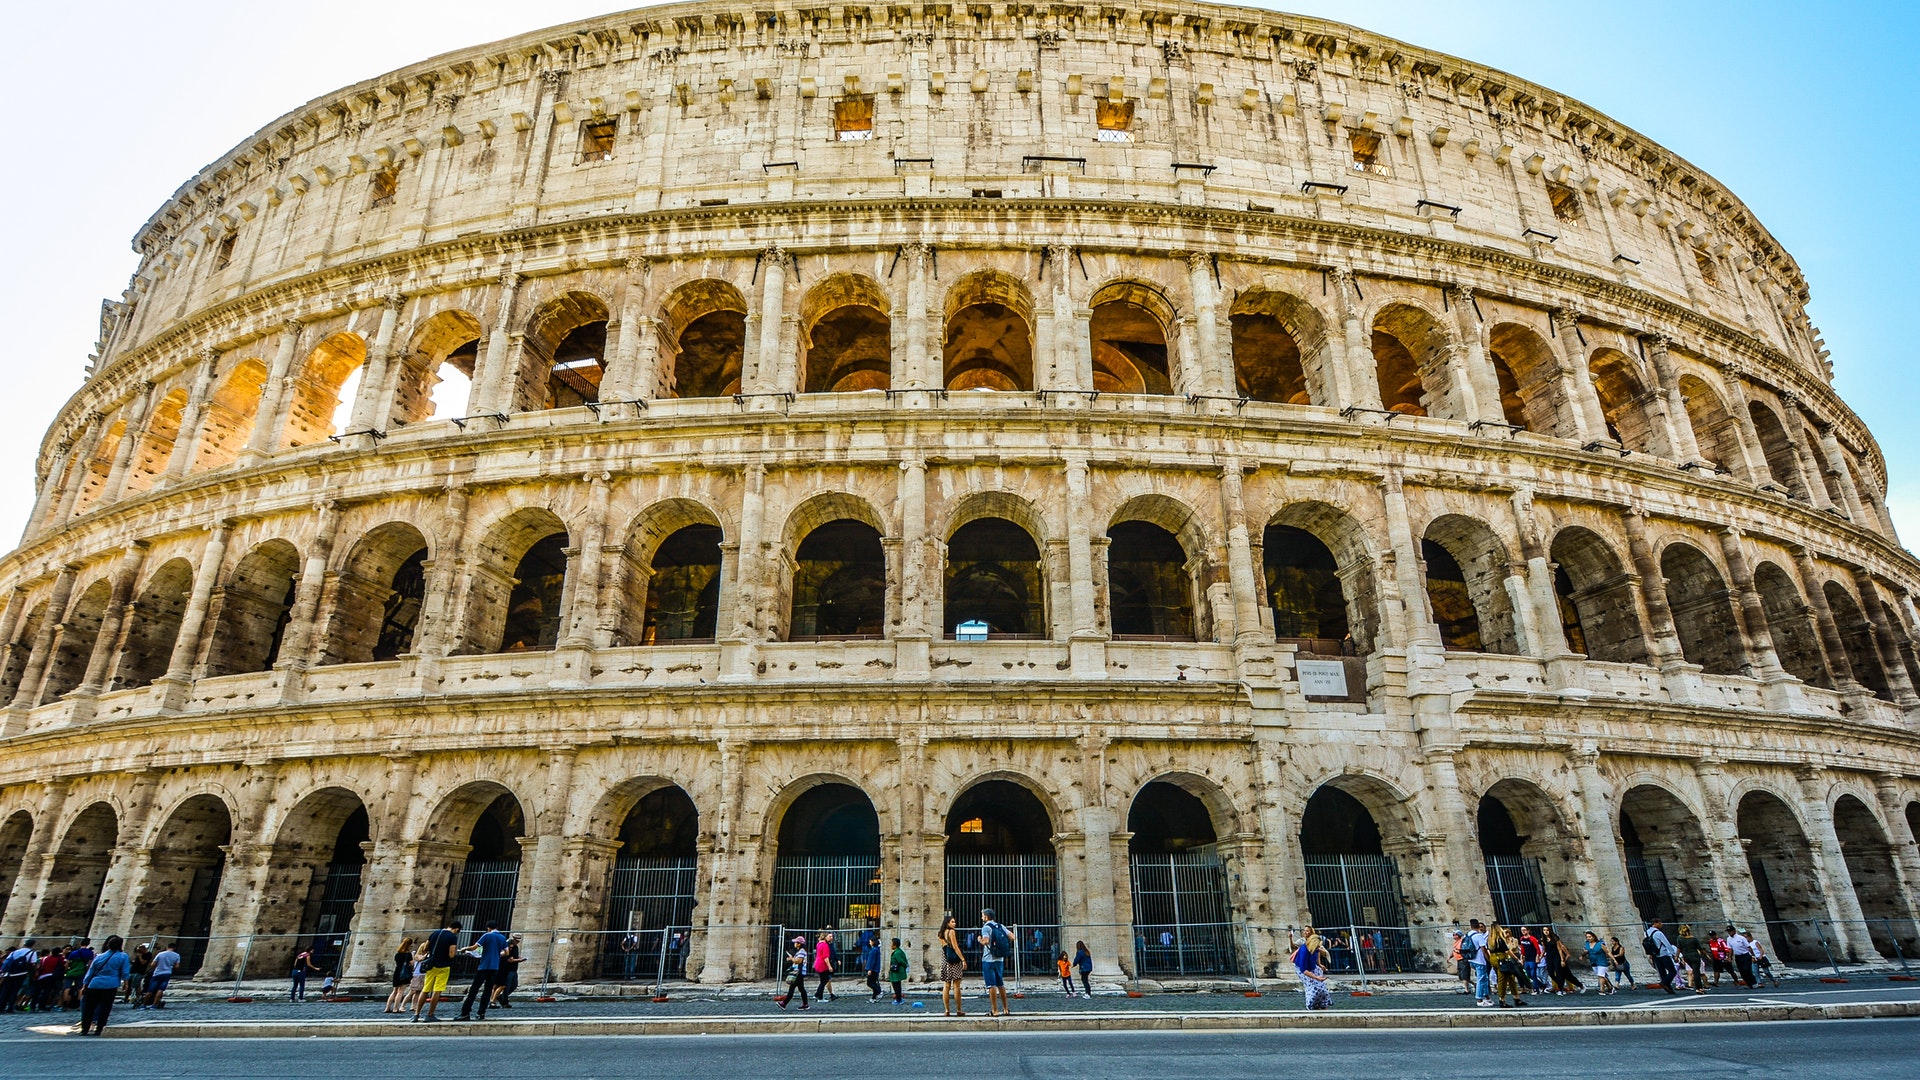 General 1920x1080 architecture tourist Colosseum Rome Ancient Rome ancient history ruins Italy city landmark World Heritage Site